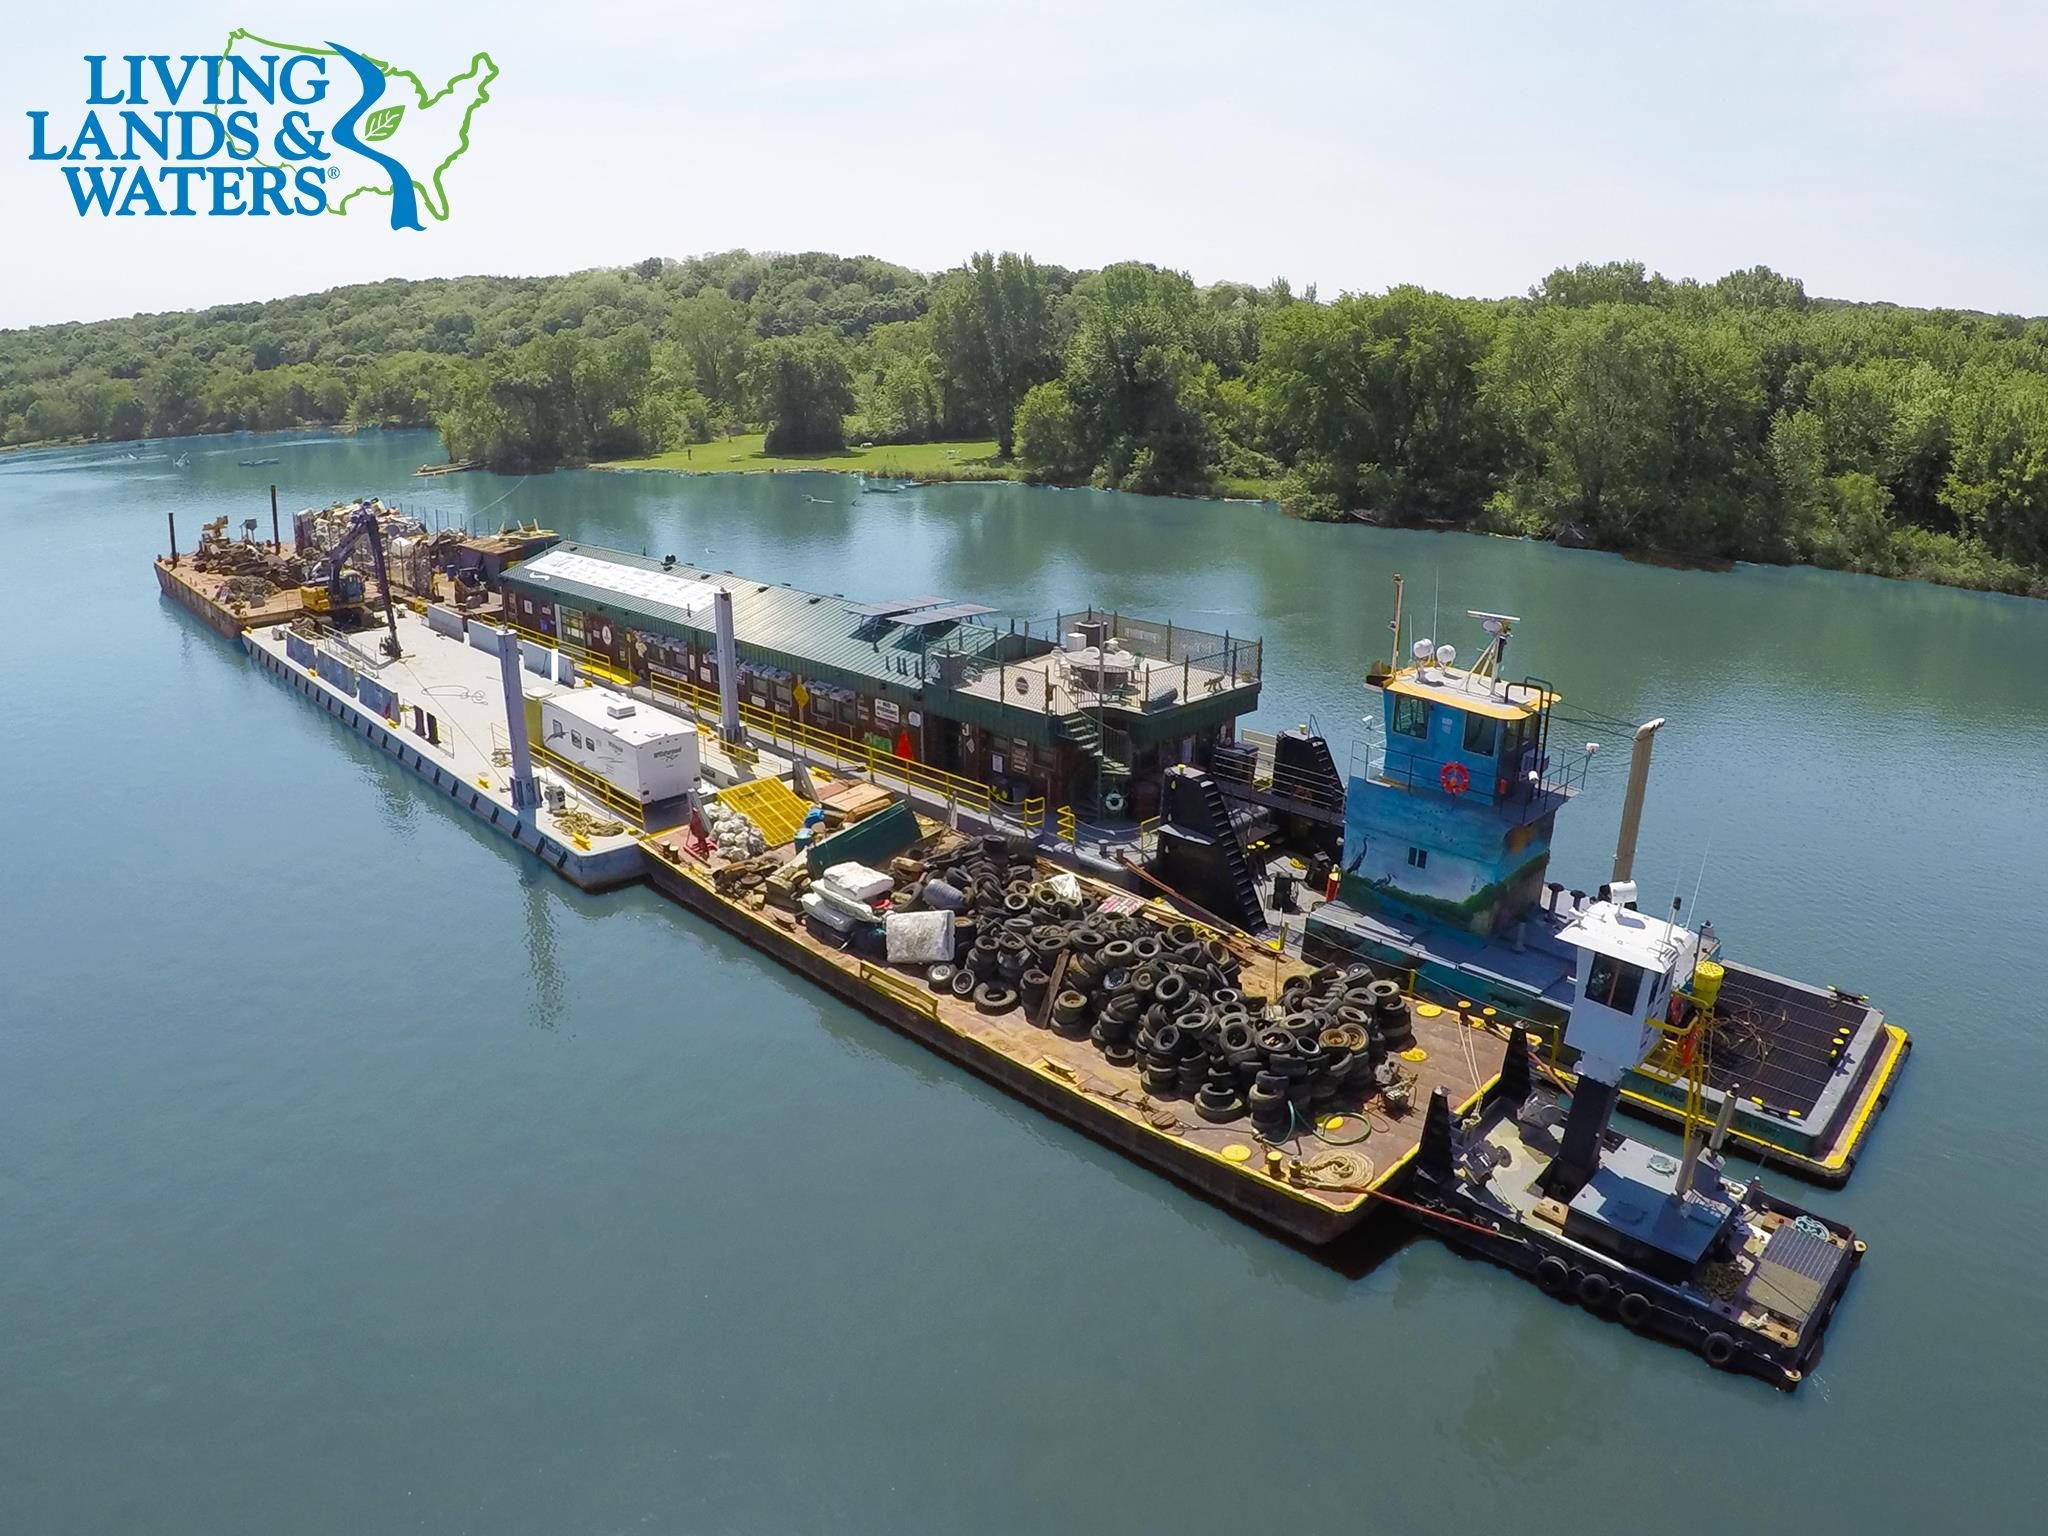 Come check out The Barge and help us celebrate 25 years of cleaning up America's Rivers! 